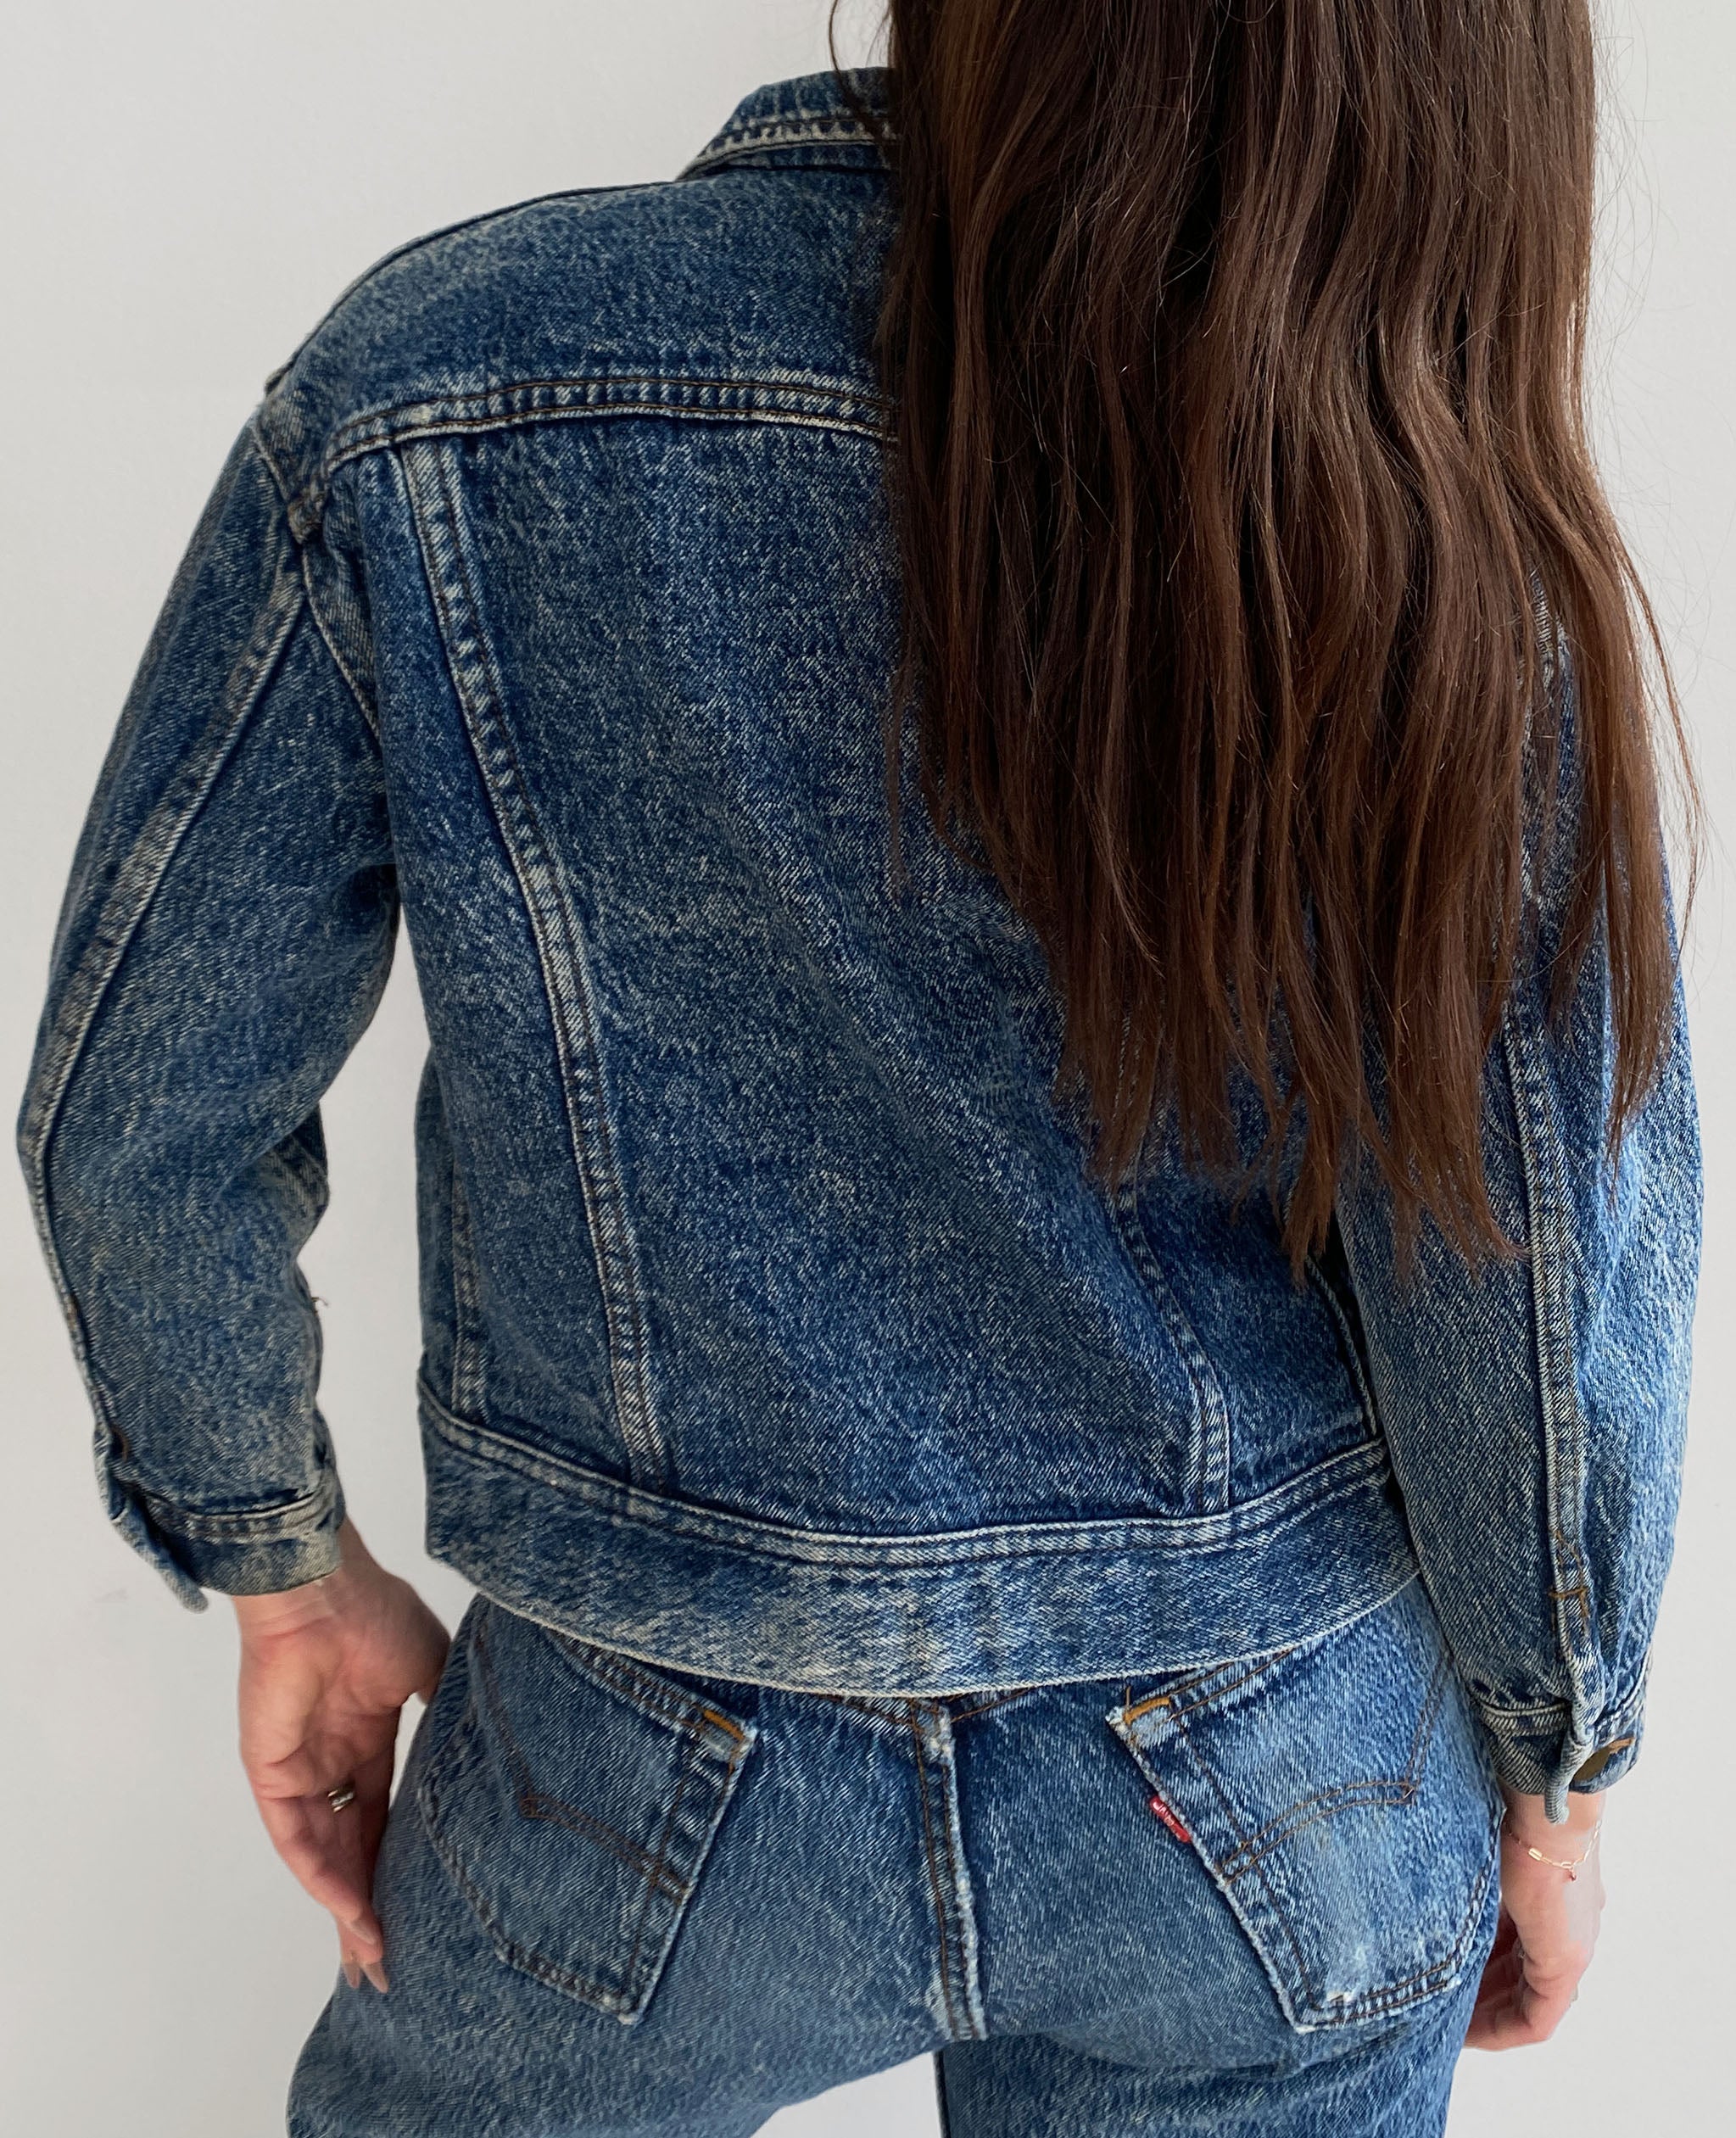 Daisy and Bees Embroidered Stonewash Denim Jacket